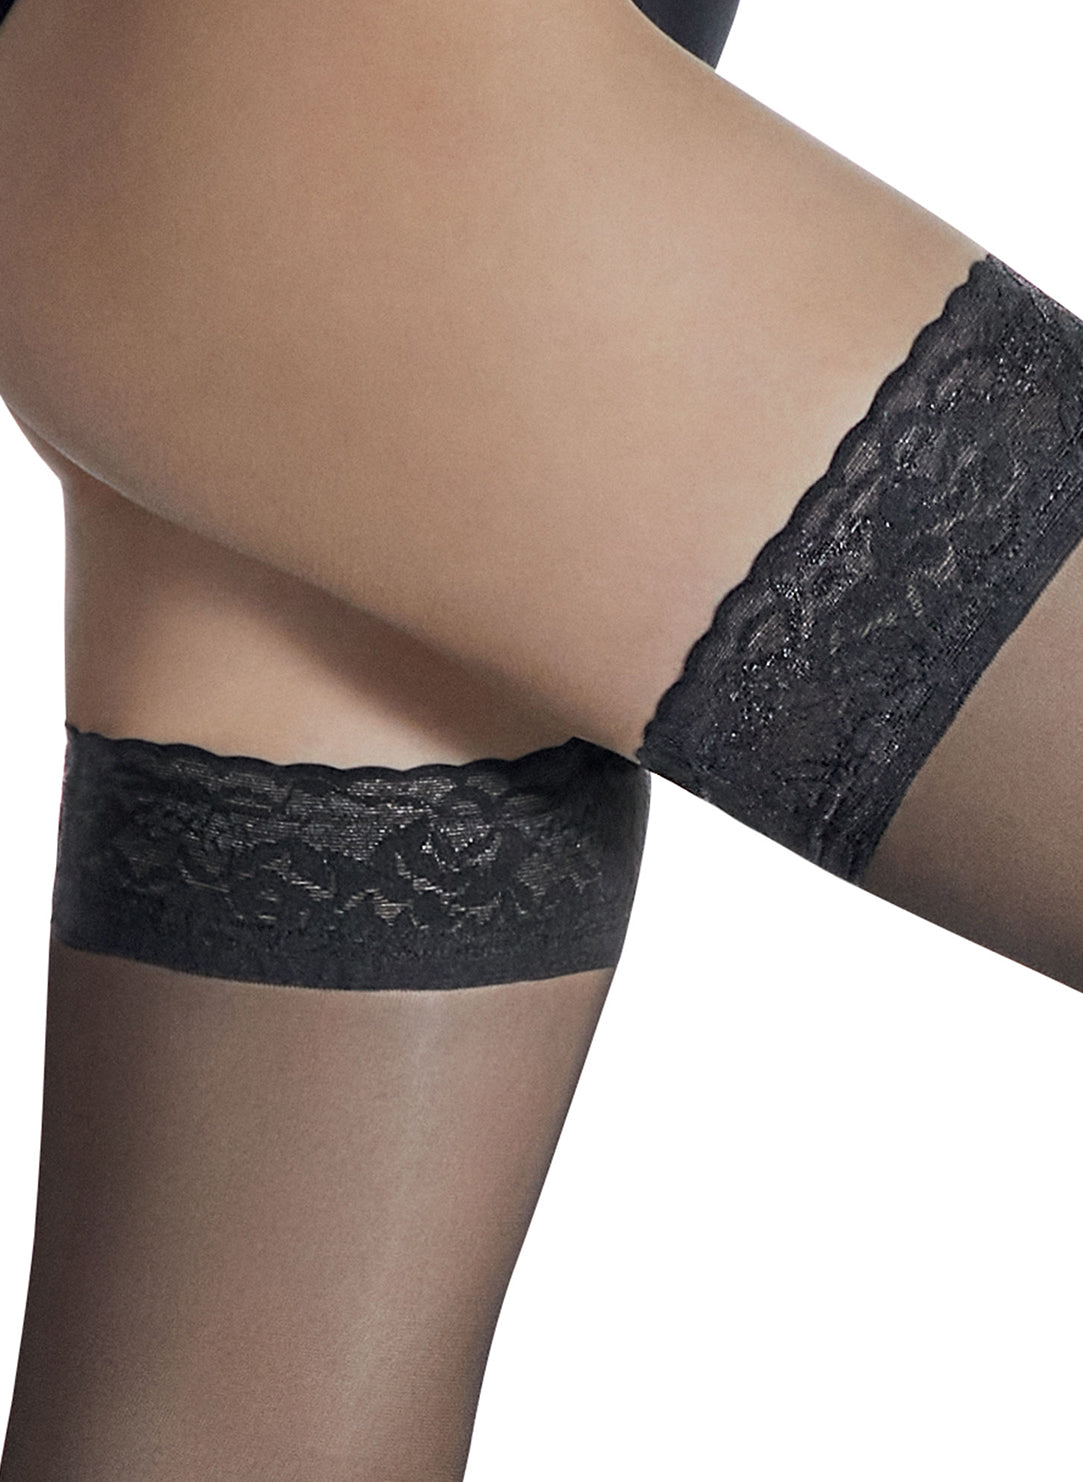 Lace Noir Stay Up Stocking